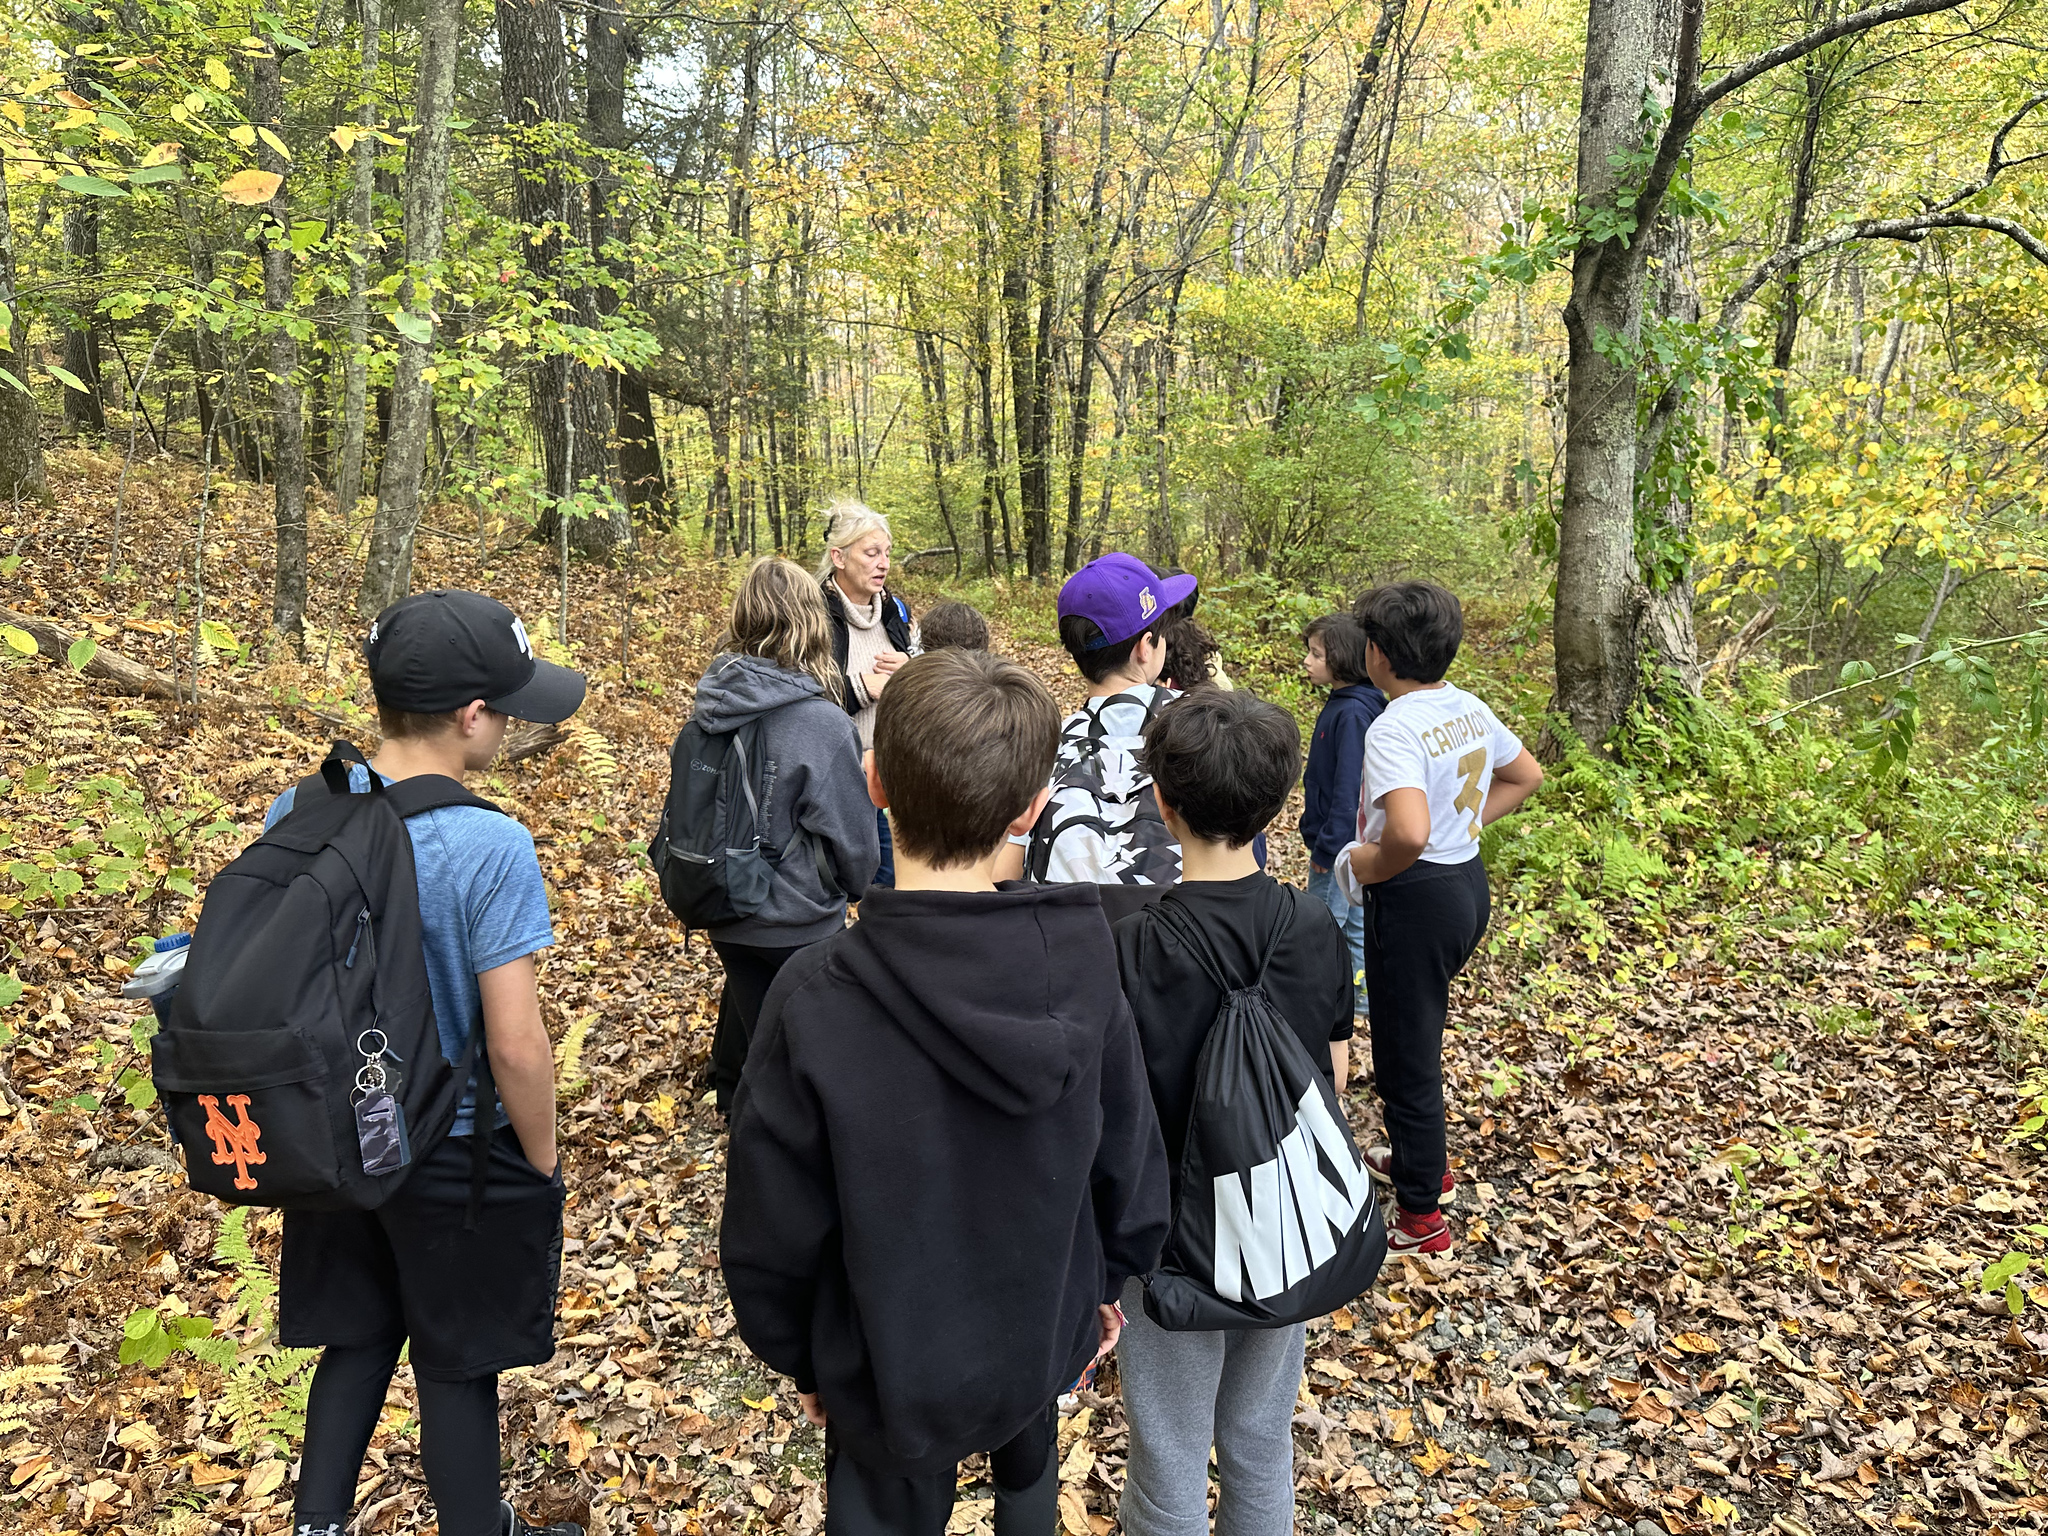 Students go on nature walk through the woods at Nature's Classroom.